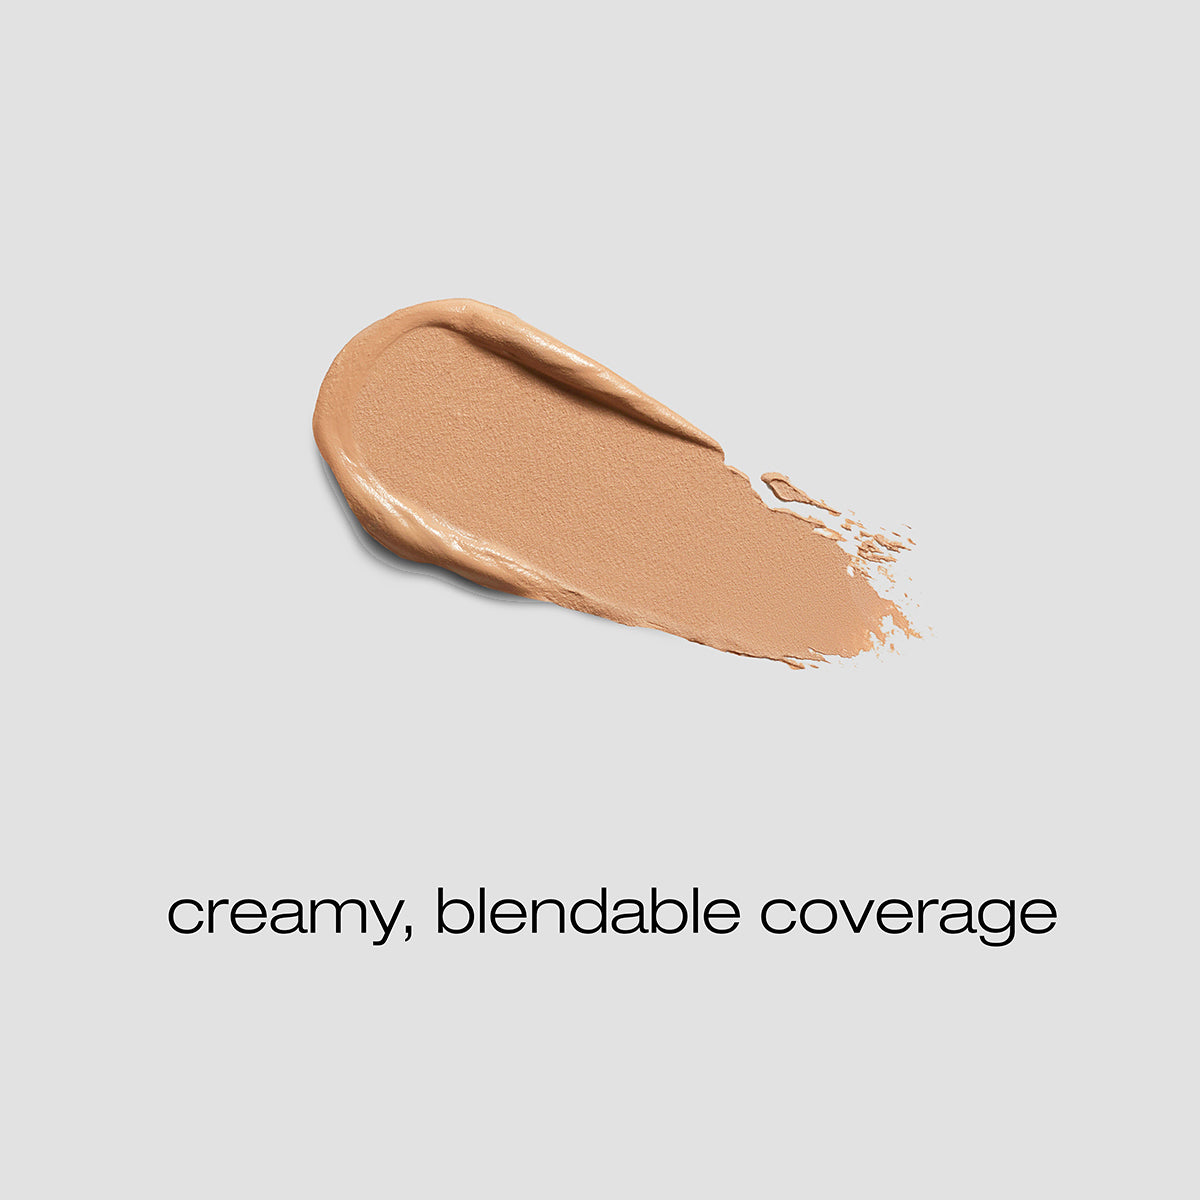 Spread of the Whiskey concealer with description of creamy, blendable coverage